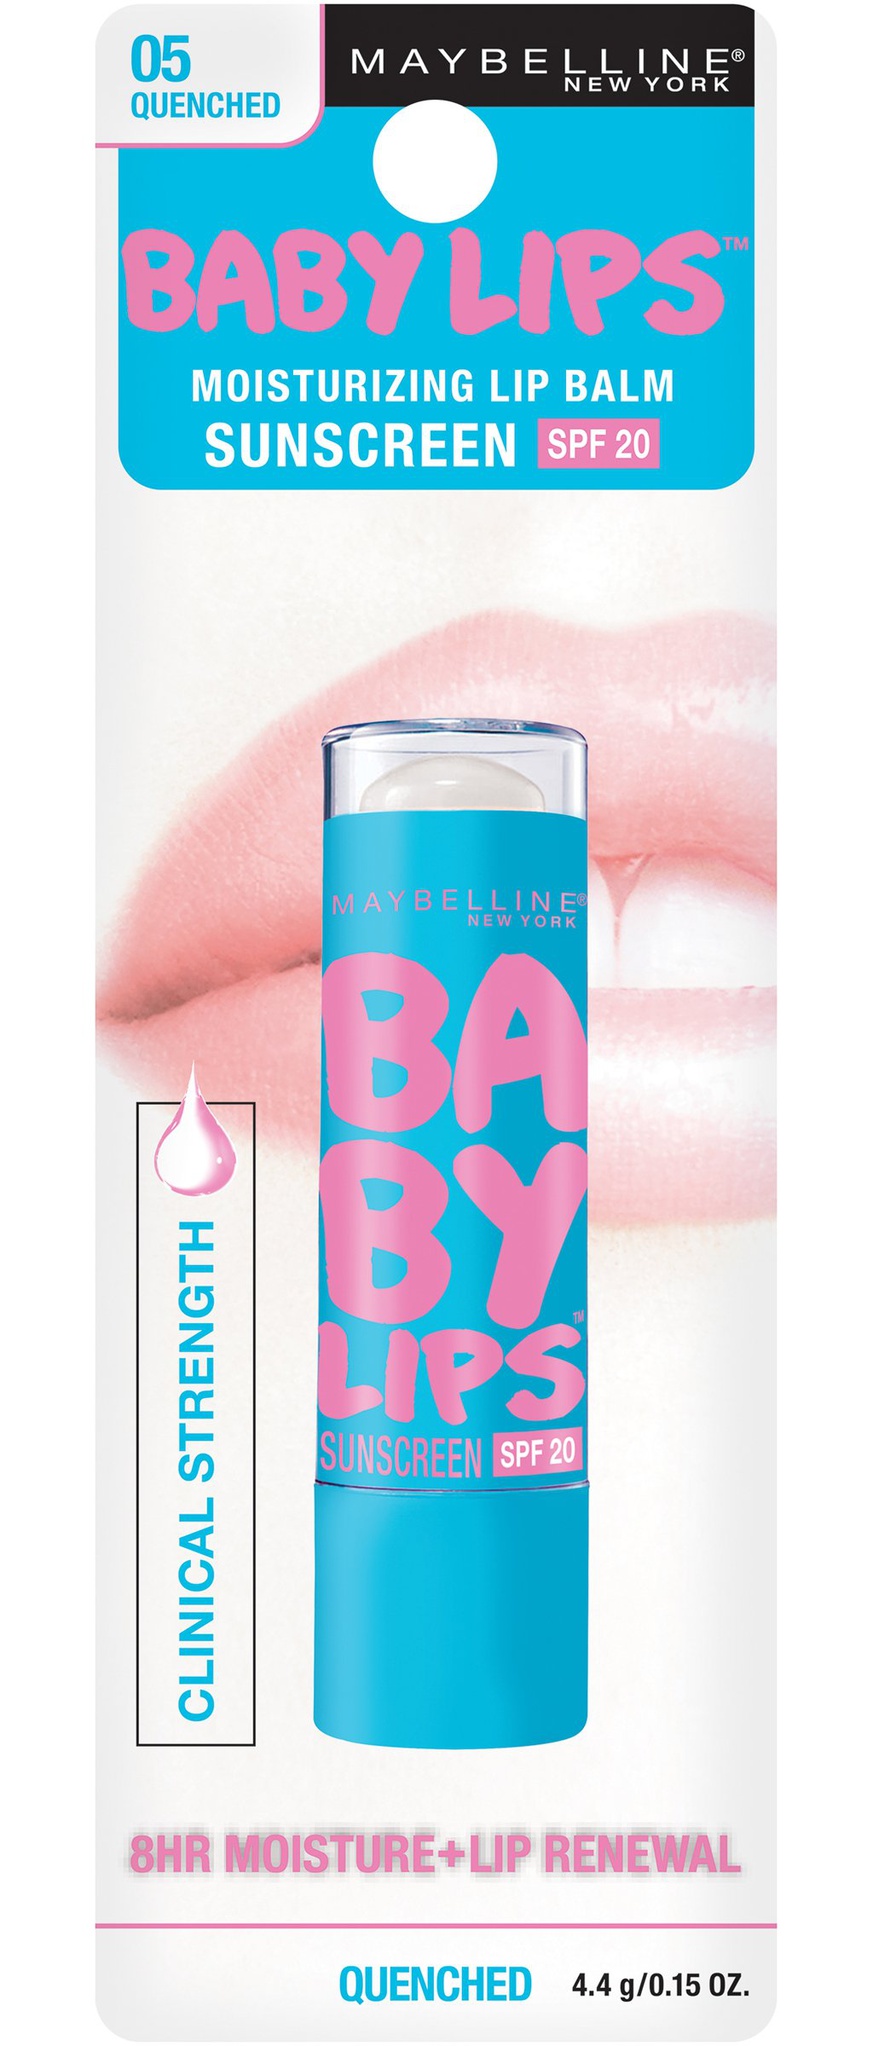 Maybelline New York Baby Lips 05 Quenched